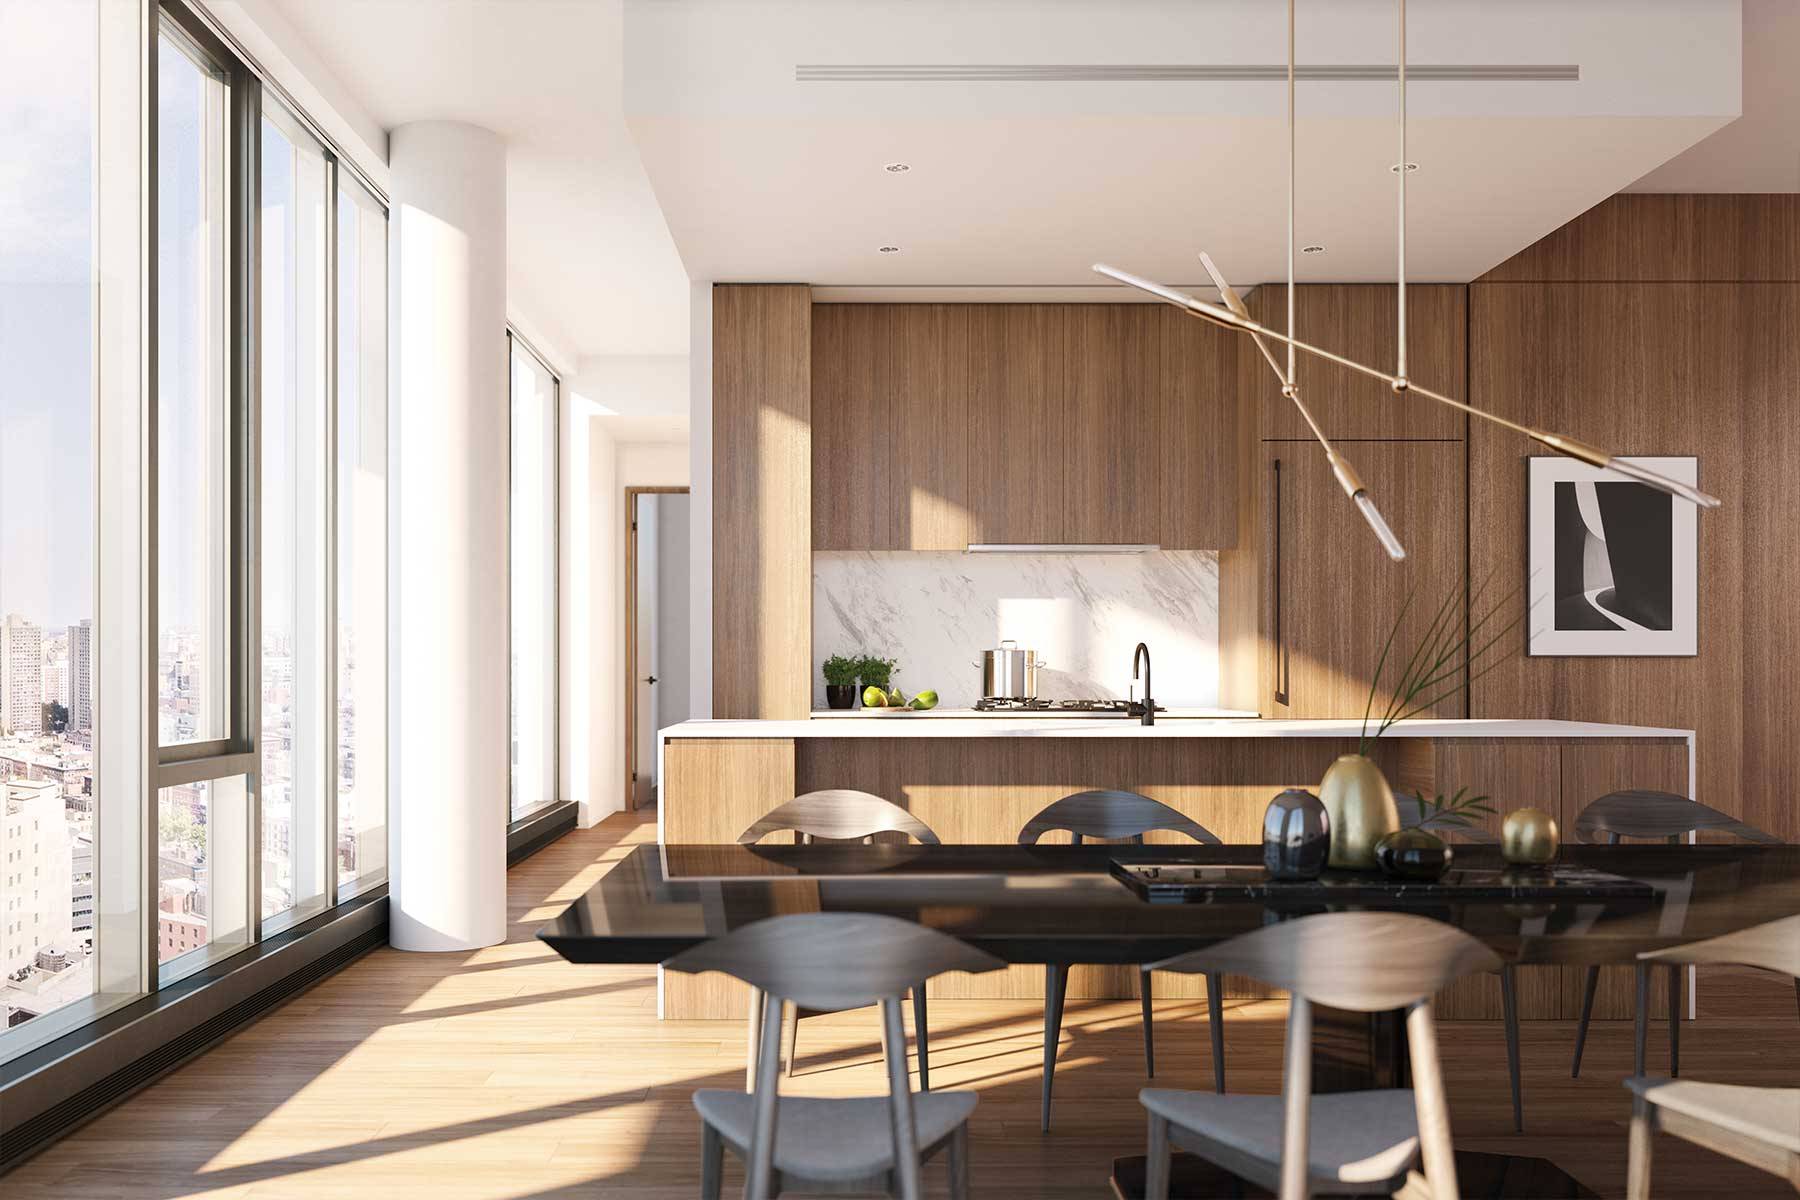 Closing Summer 2019 570 Broome is a collection of fifty four contemporary residences that draw inspiration from the history and style of West SoHo.